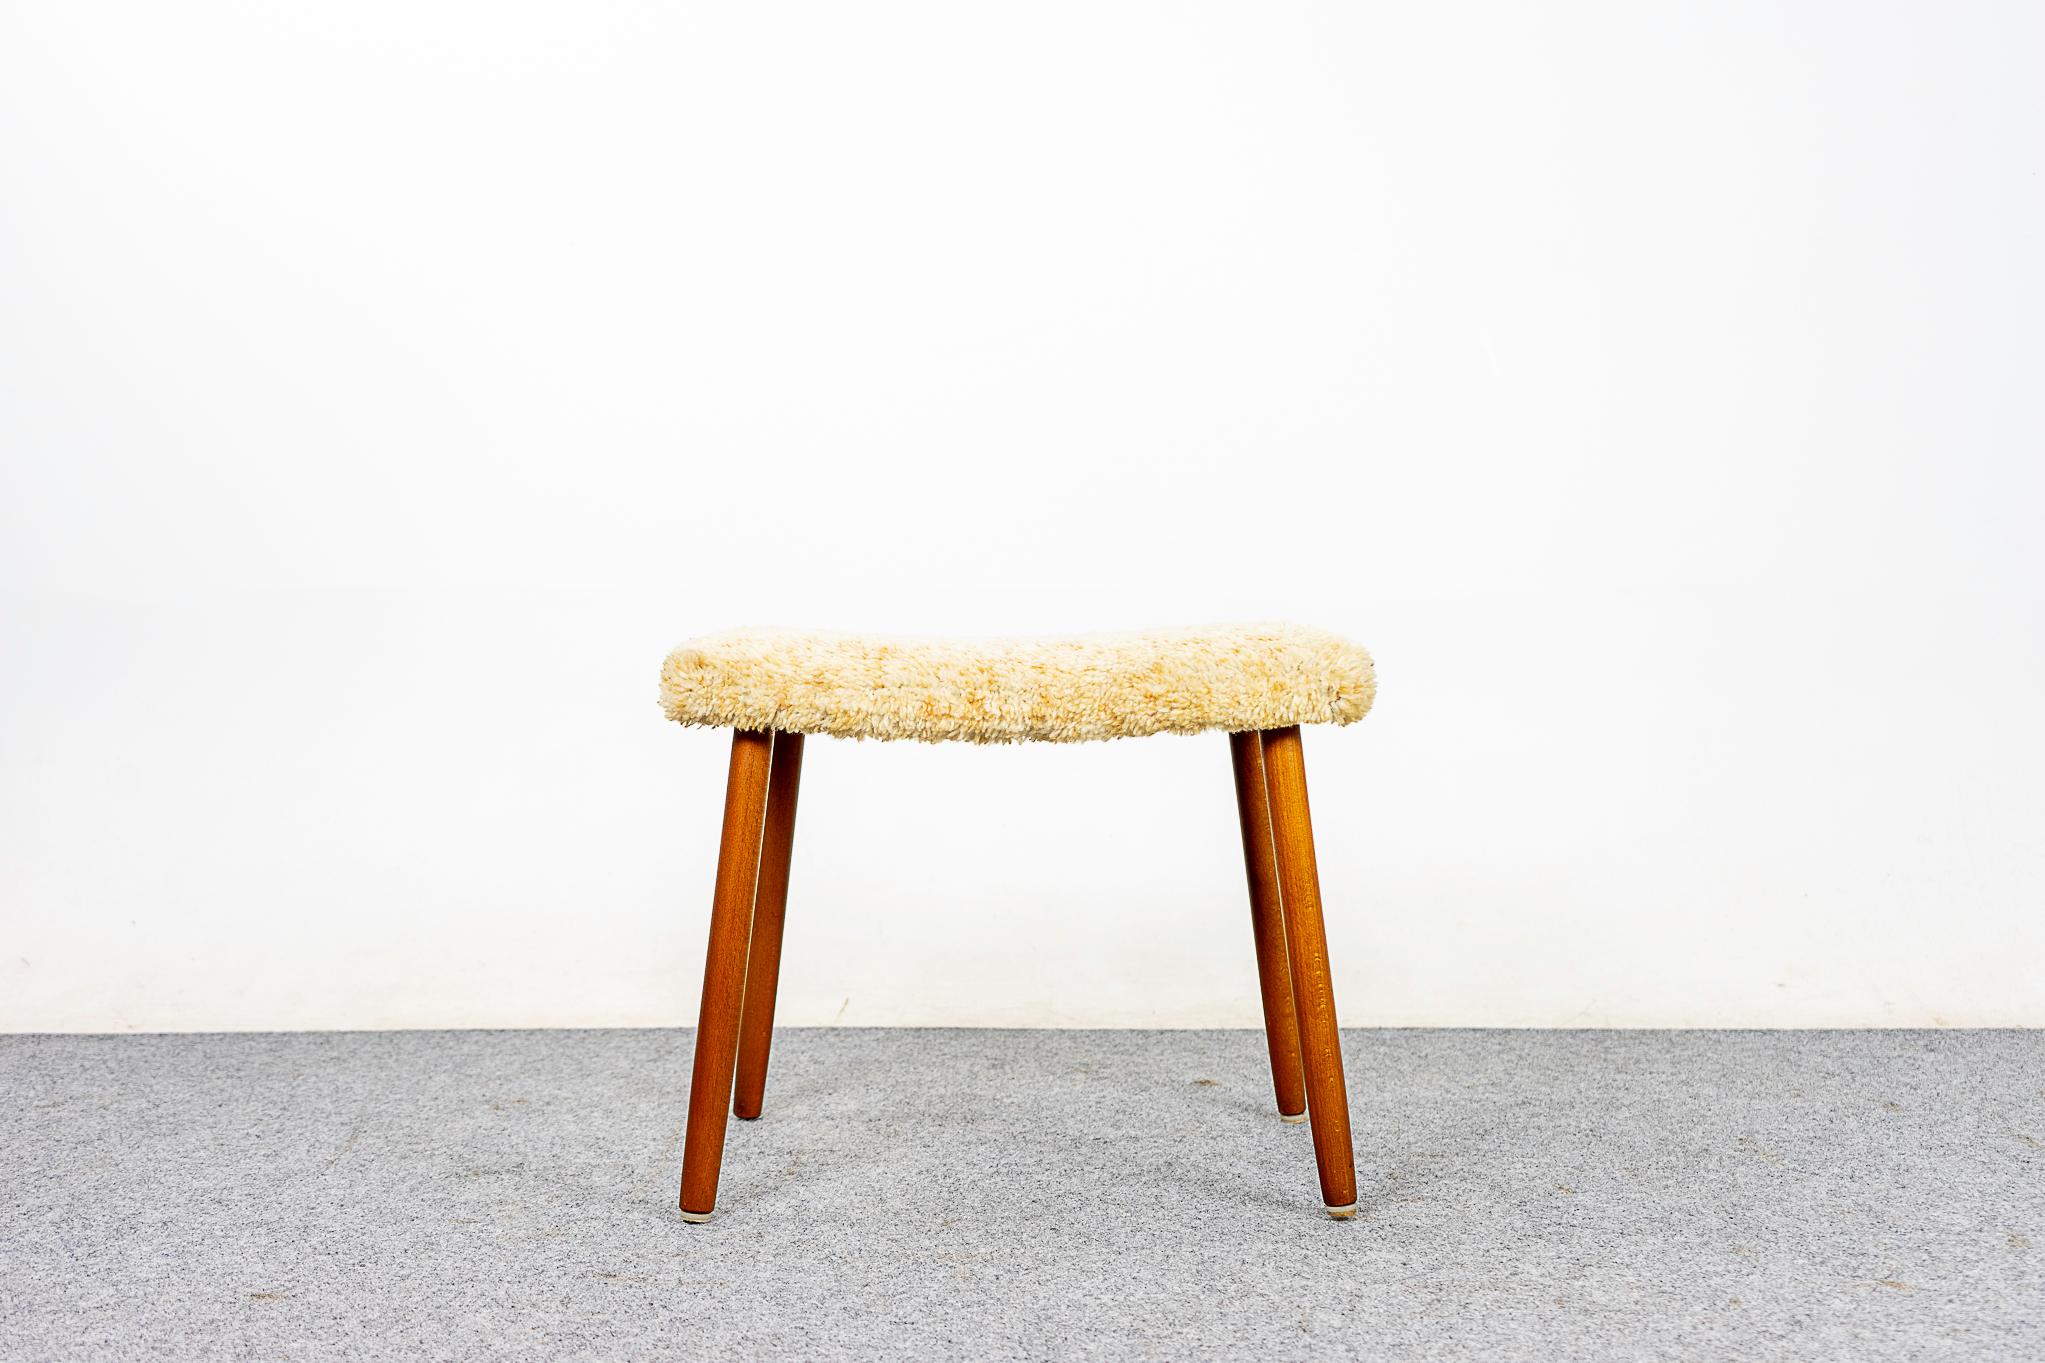 Beech wood Danish footstool, circa 1960's. Can be used with virtually any seating type, easy to move around the home. Original as-is upholstery.